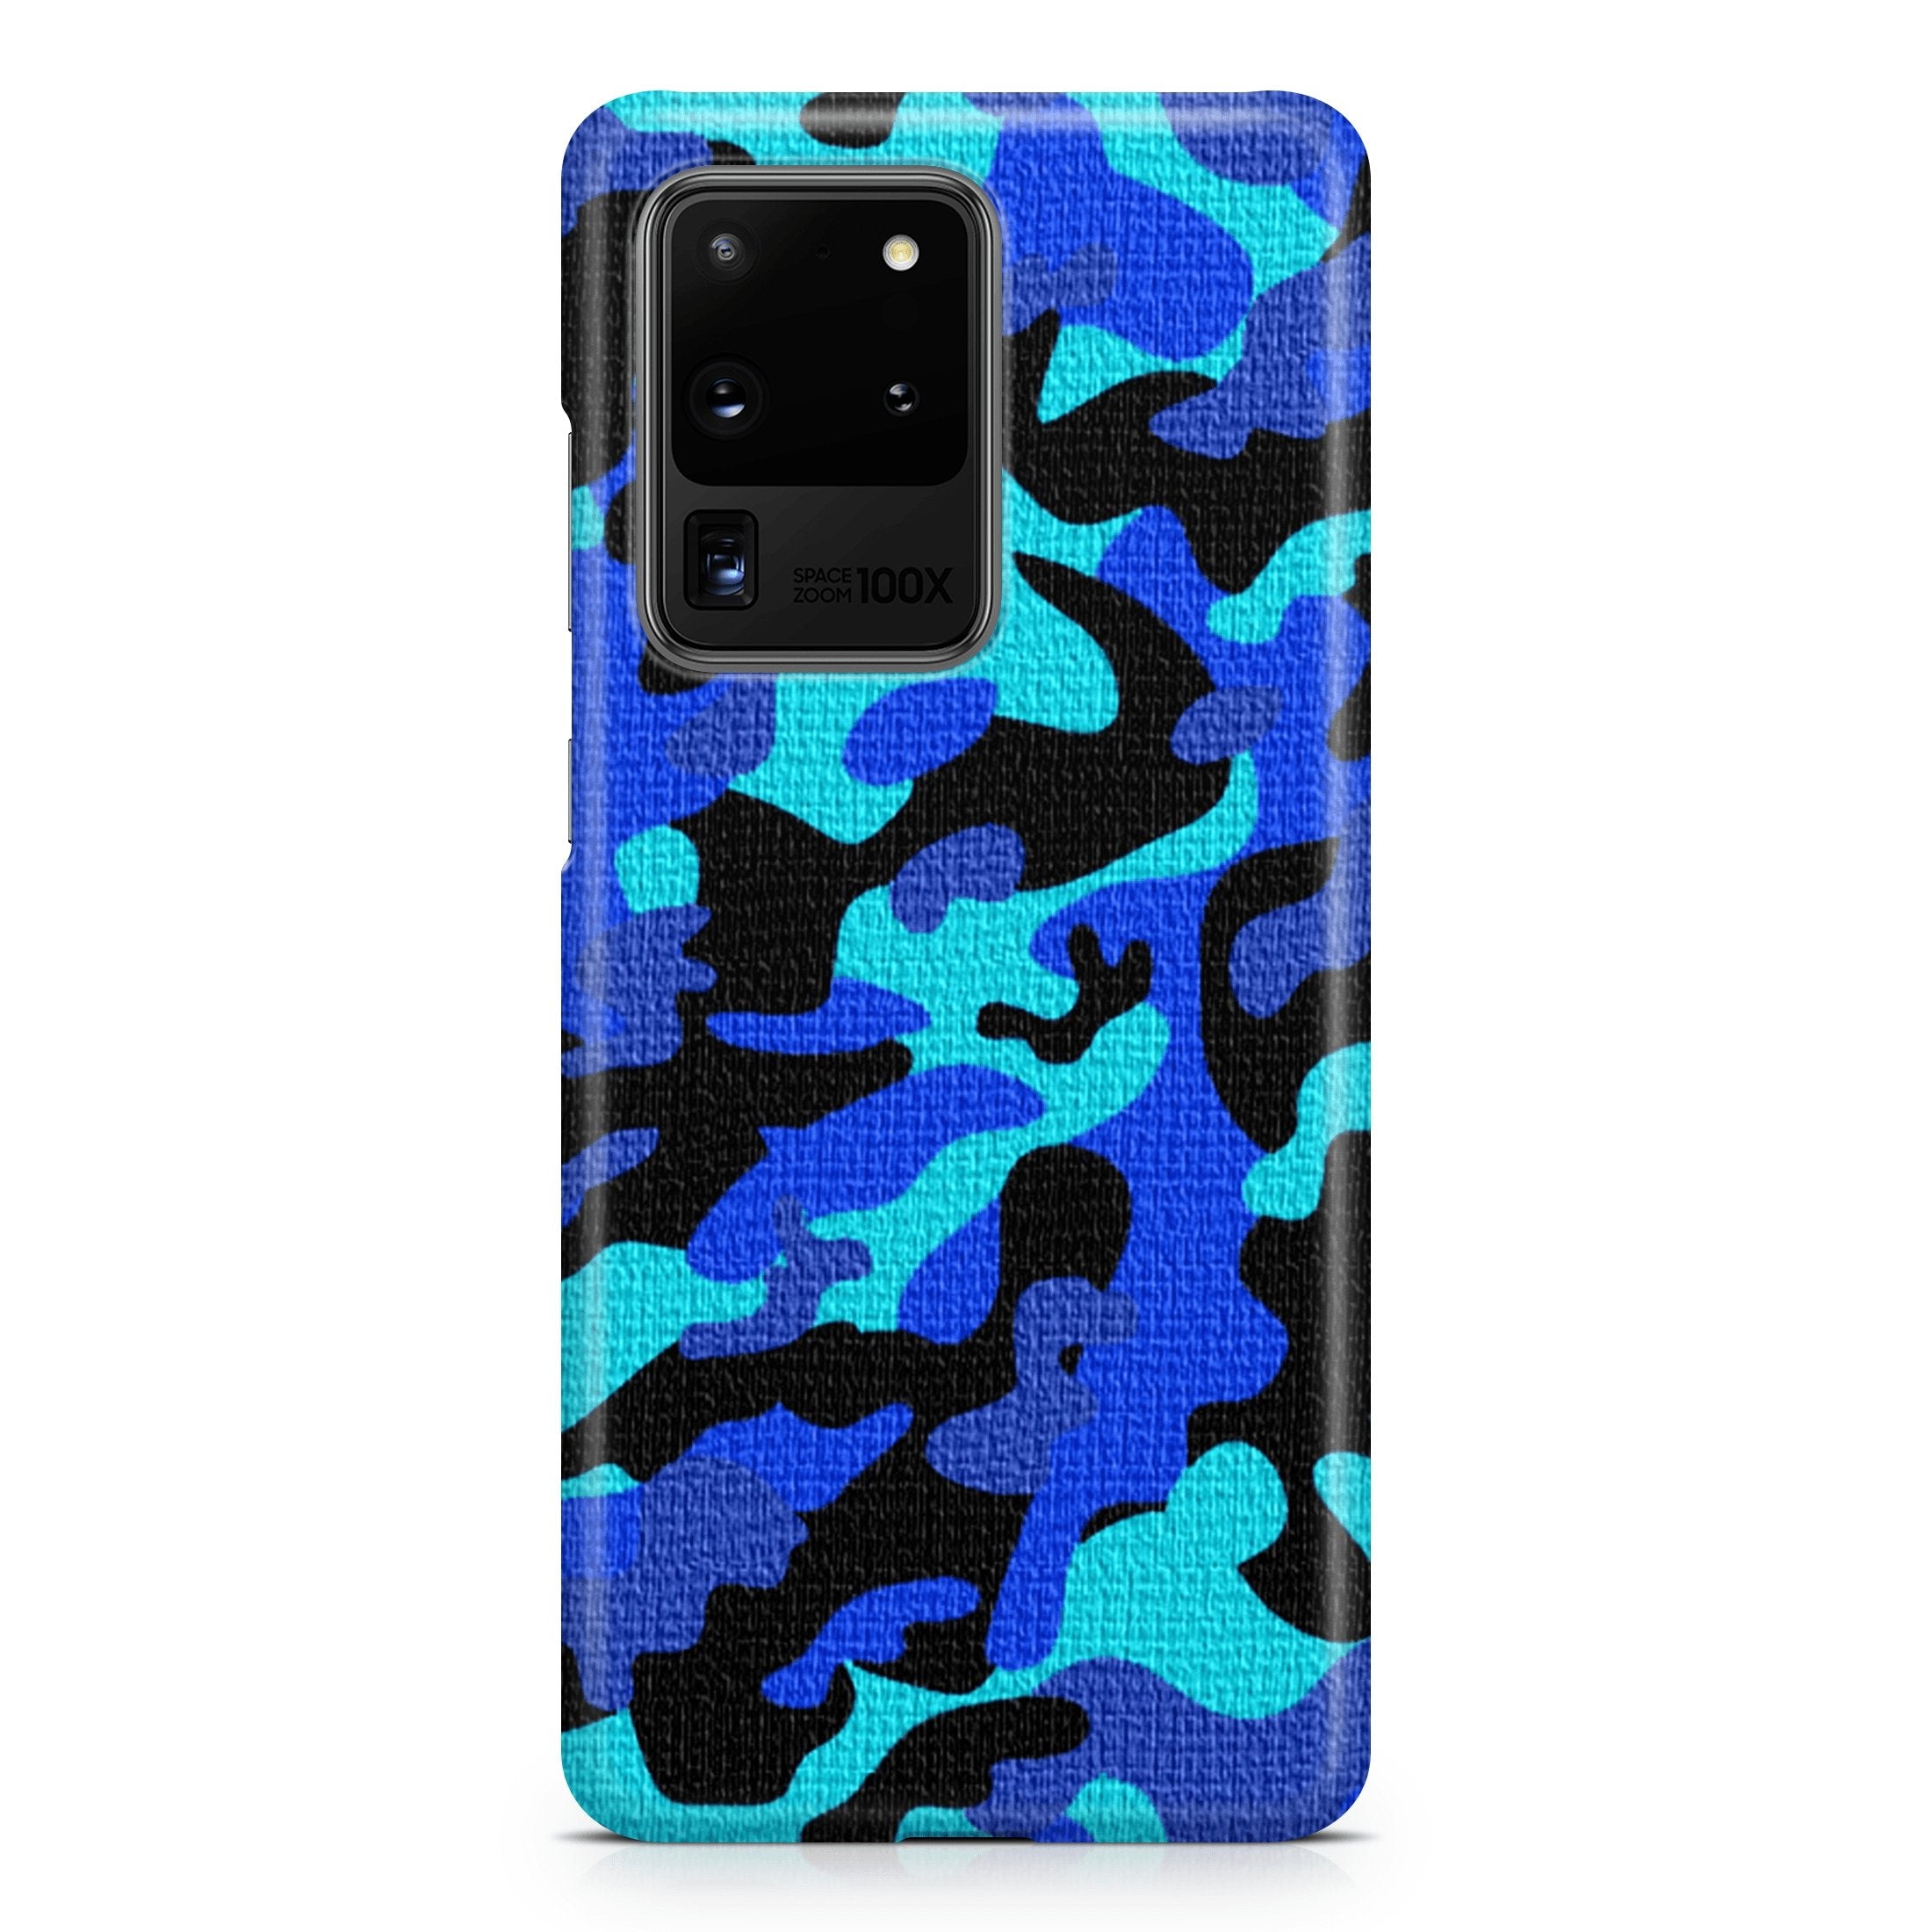 Blue Camo - Samsung phone case designs by CaseSwagger